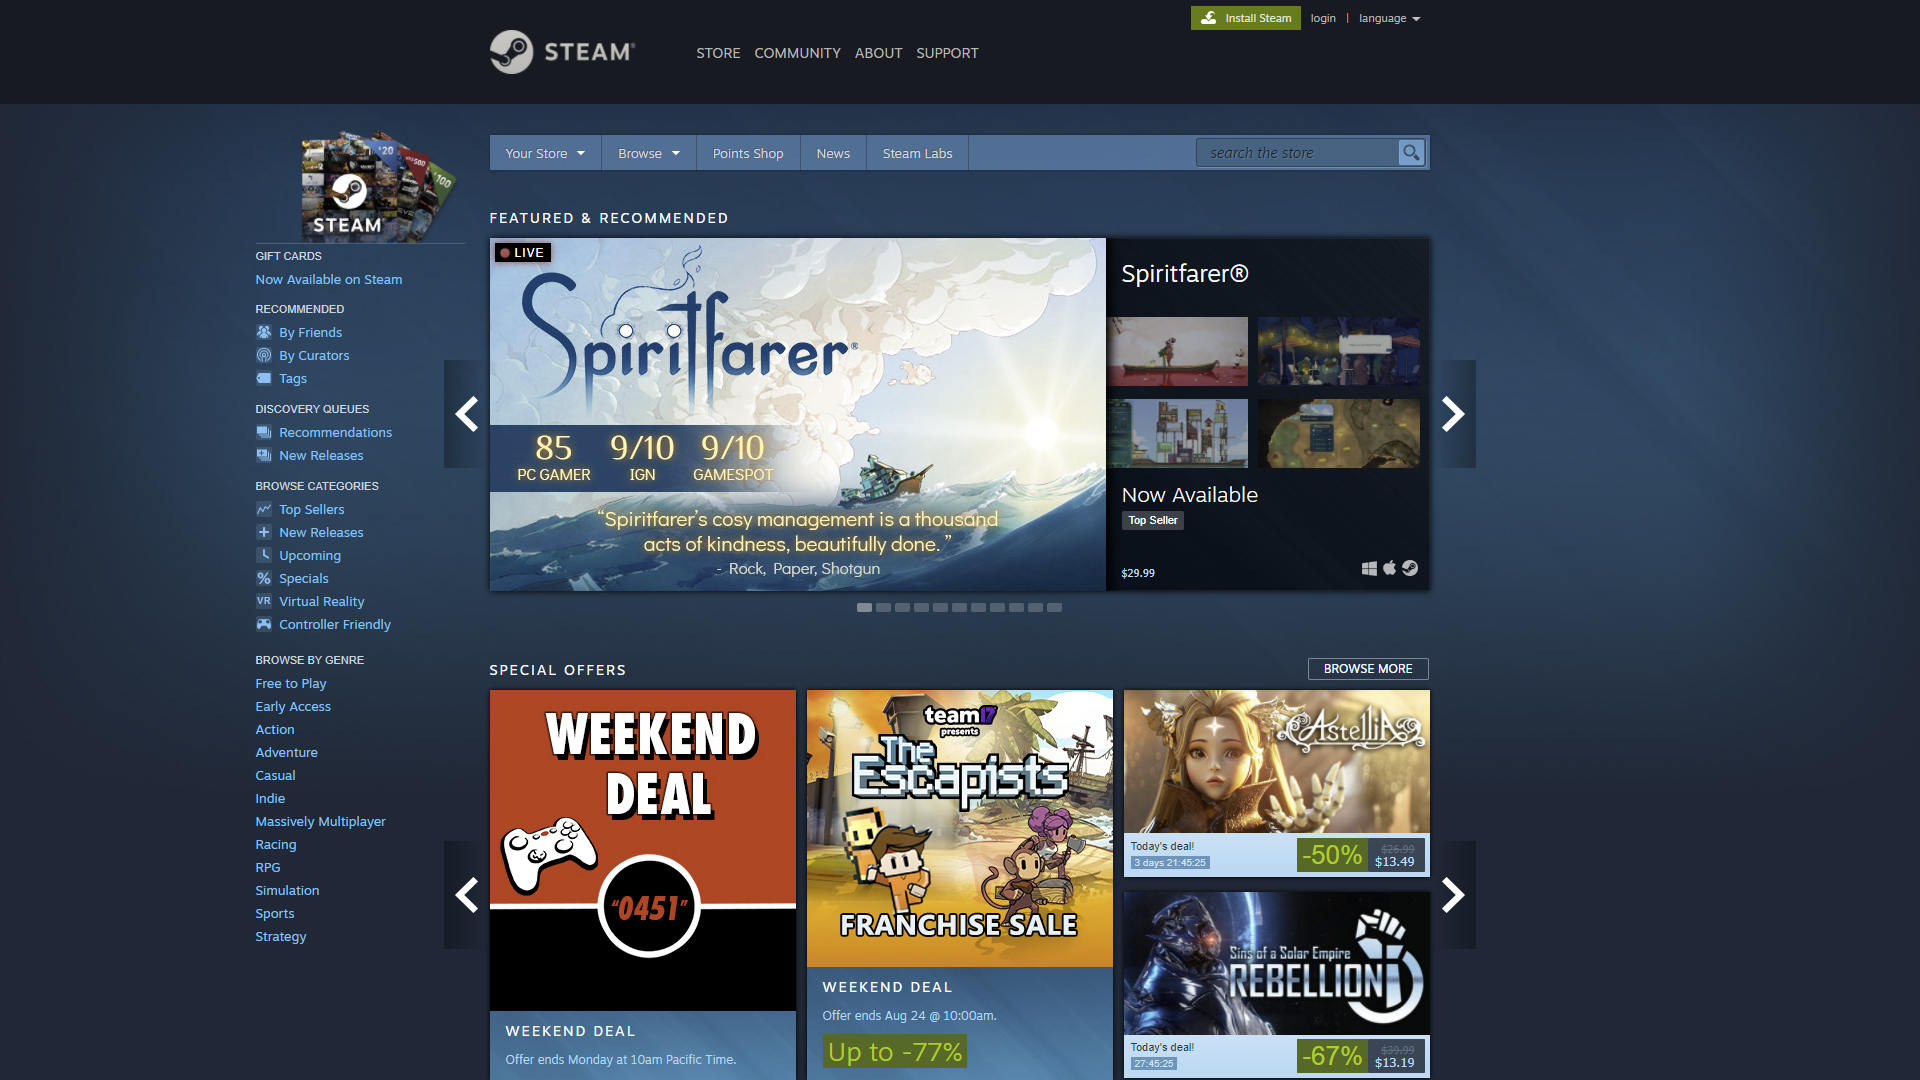 Steam's Redesigned Store Is Live - GameSpot